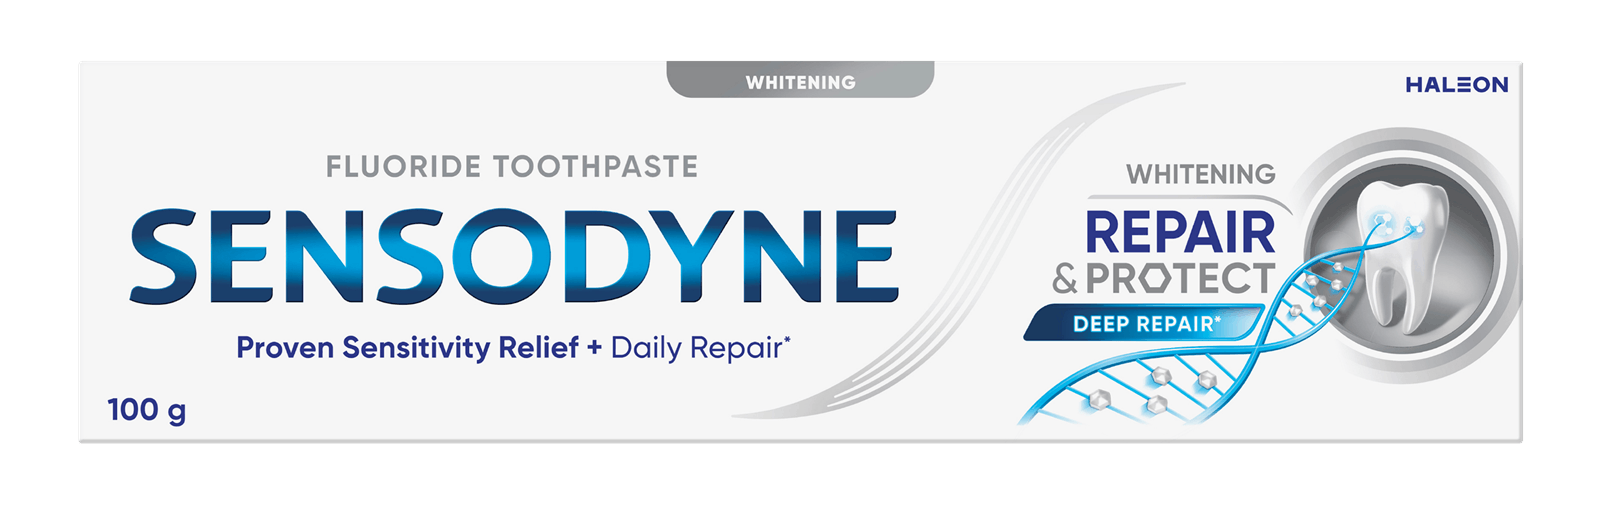 Sensodyne Rapair and Protect in Whitening toothpaste